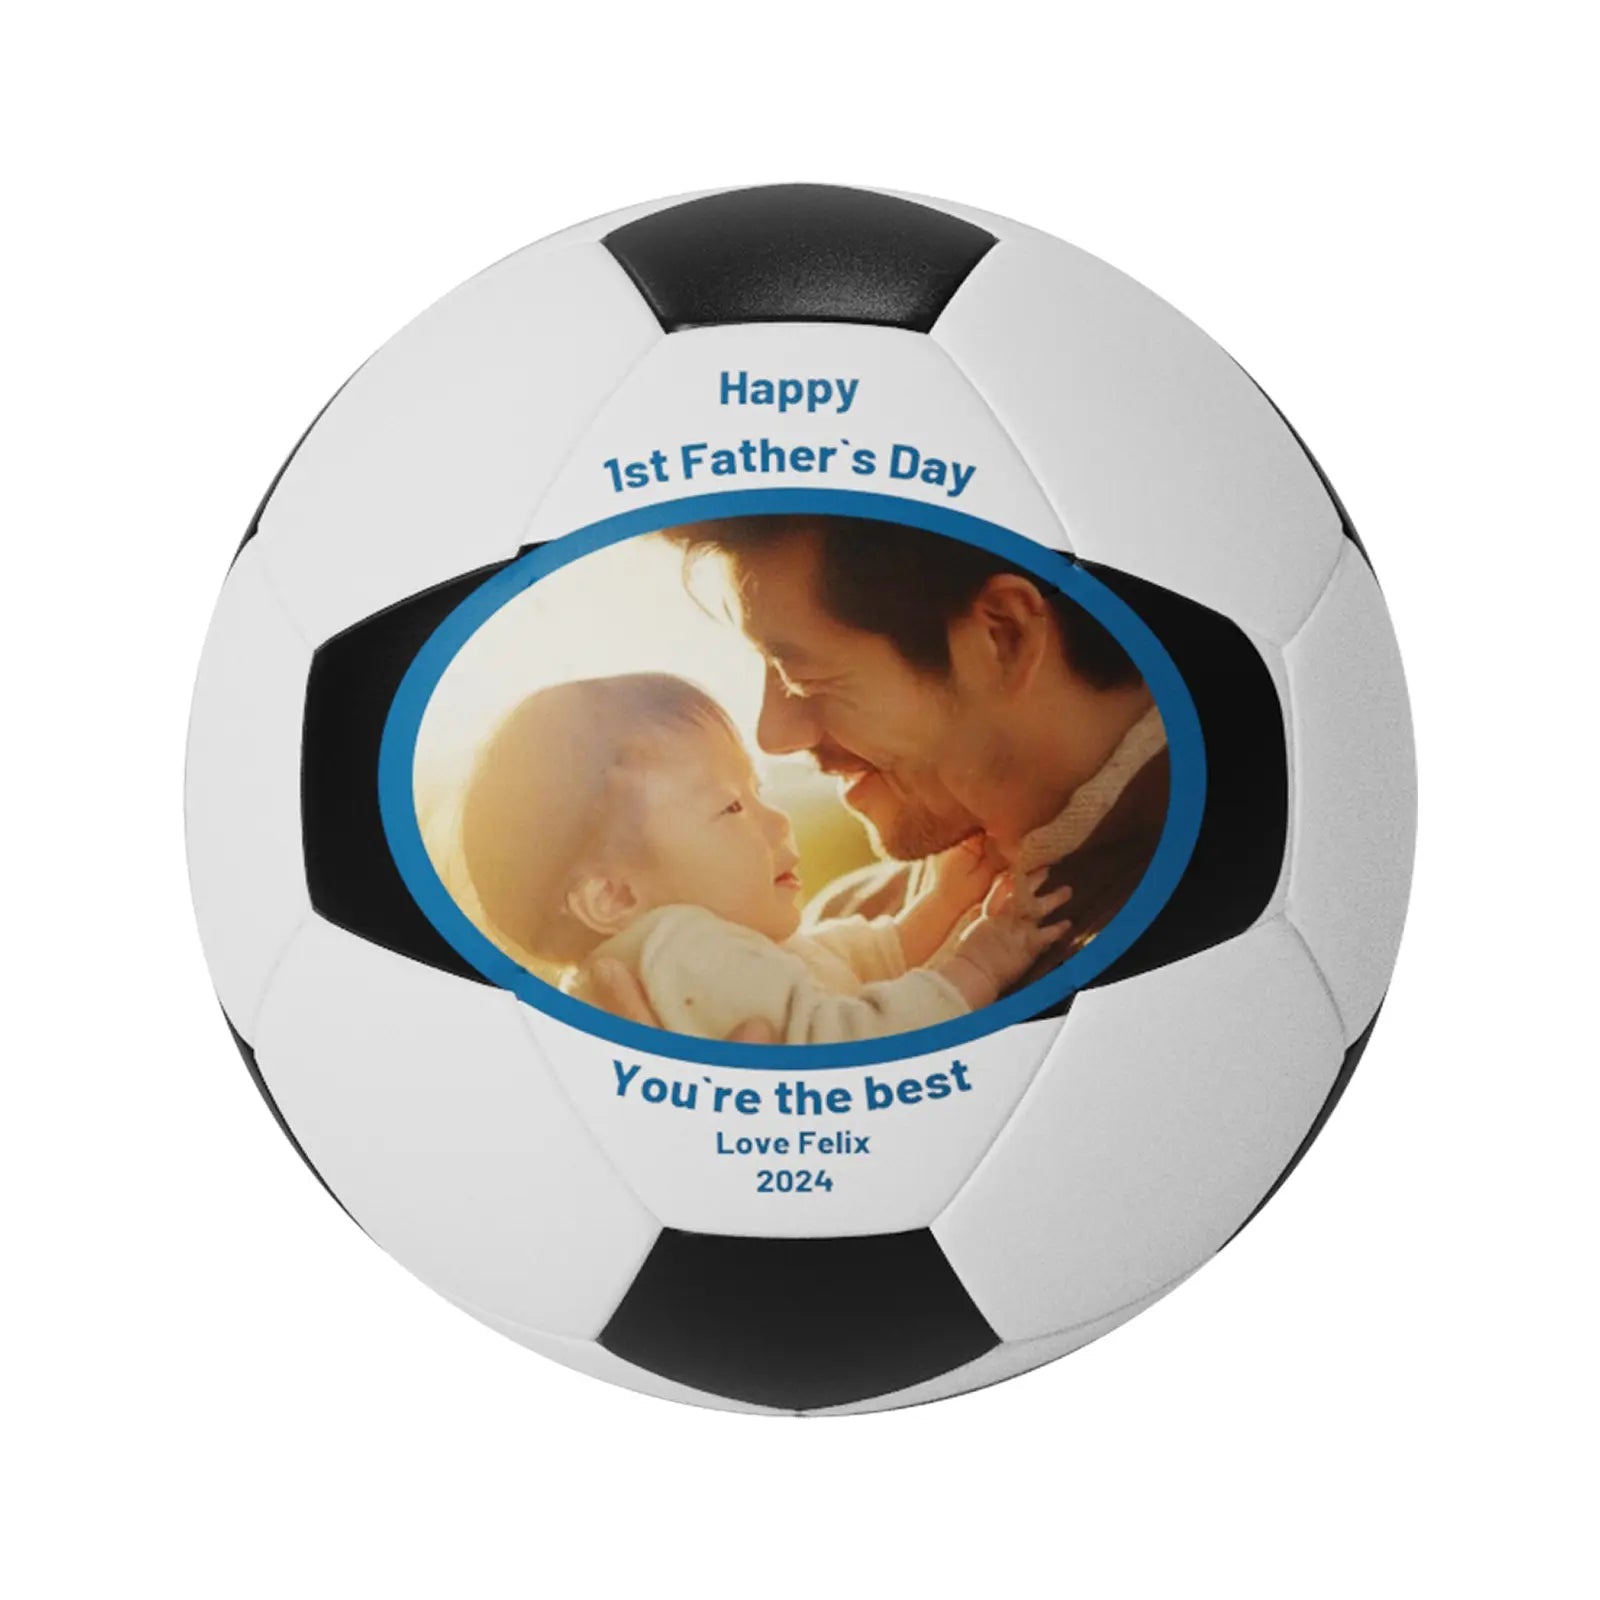 Father's Day Photo Personalized Soccer Ball - Family Watchs